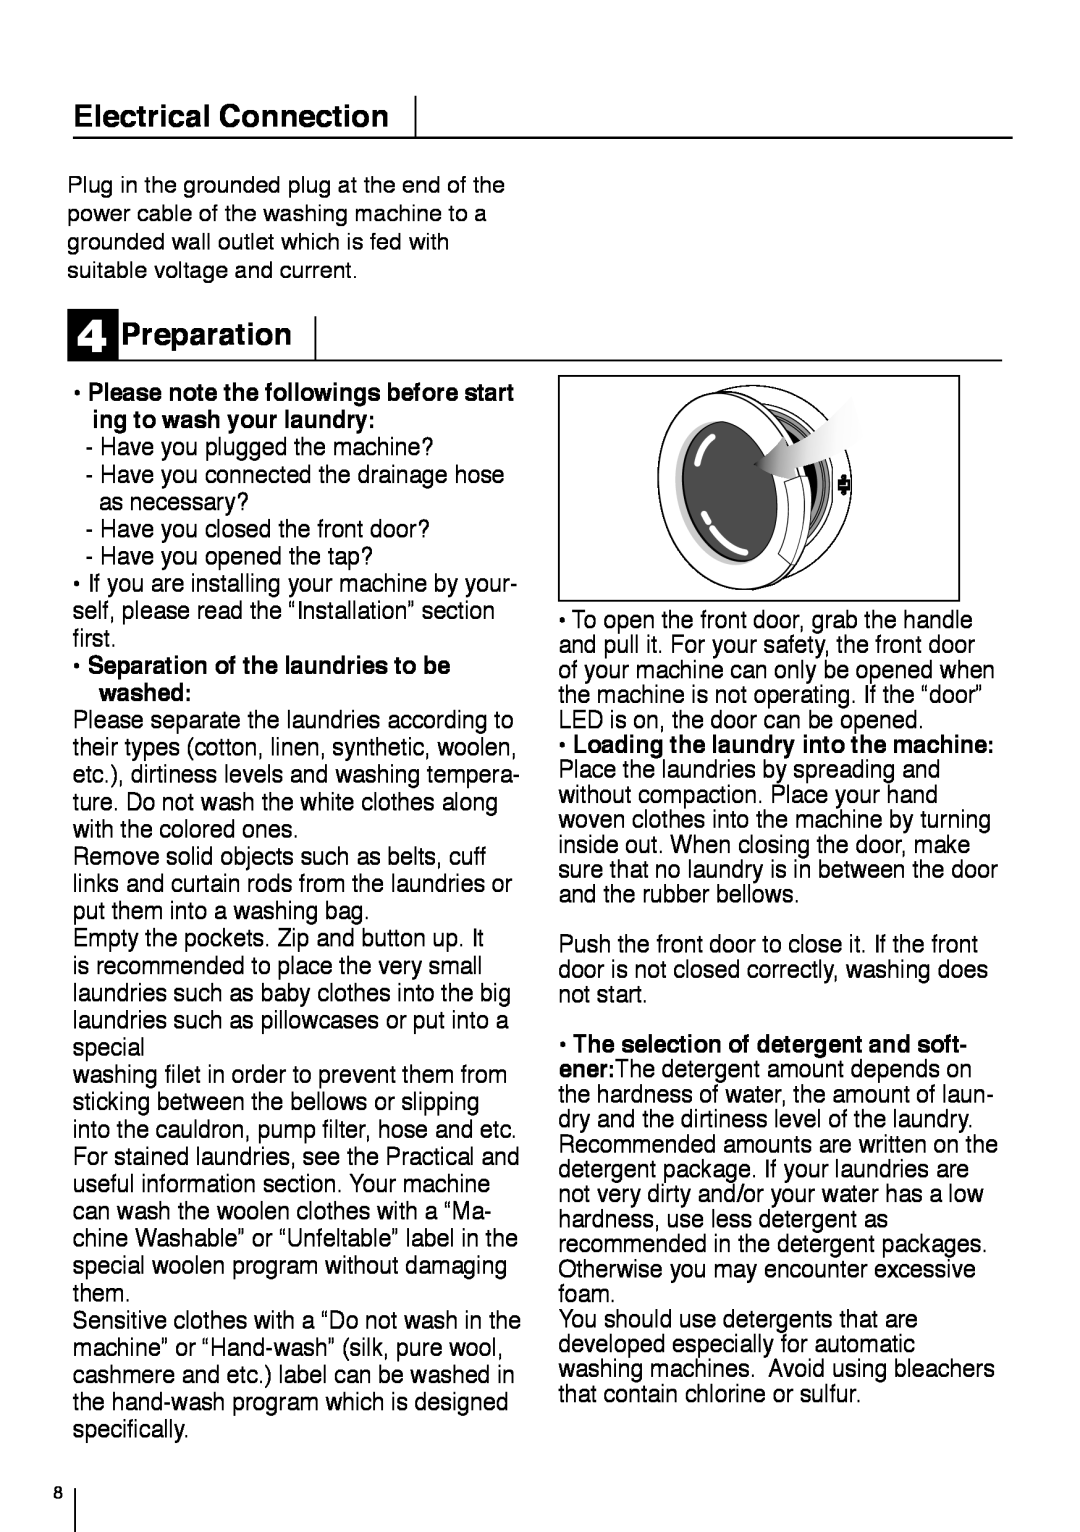 Smeg LBS 845 manual Electrical Connection, Preparation, Please note the followings before start ing to wash your laundry 